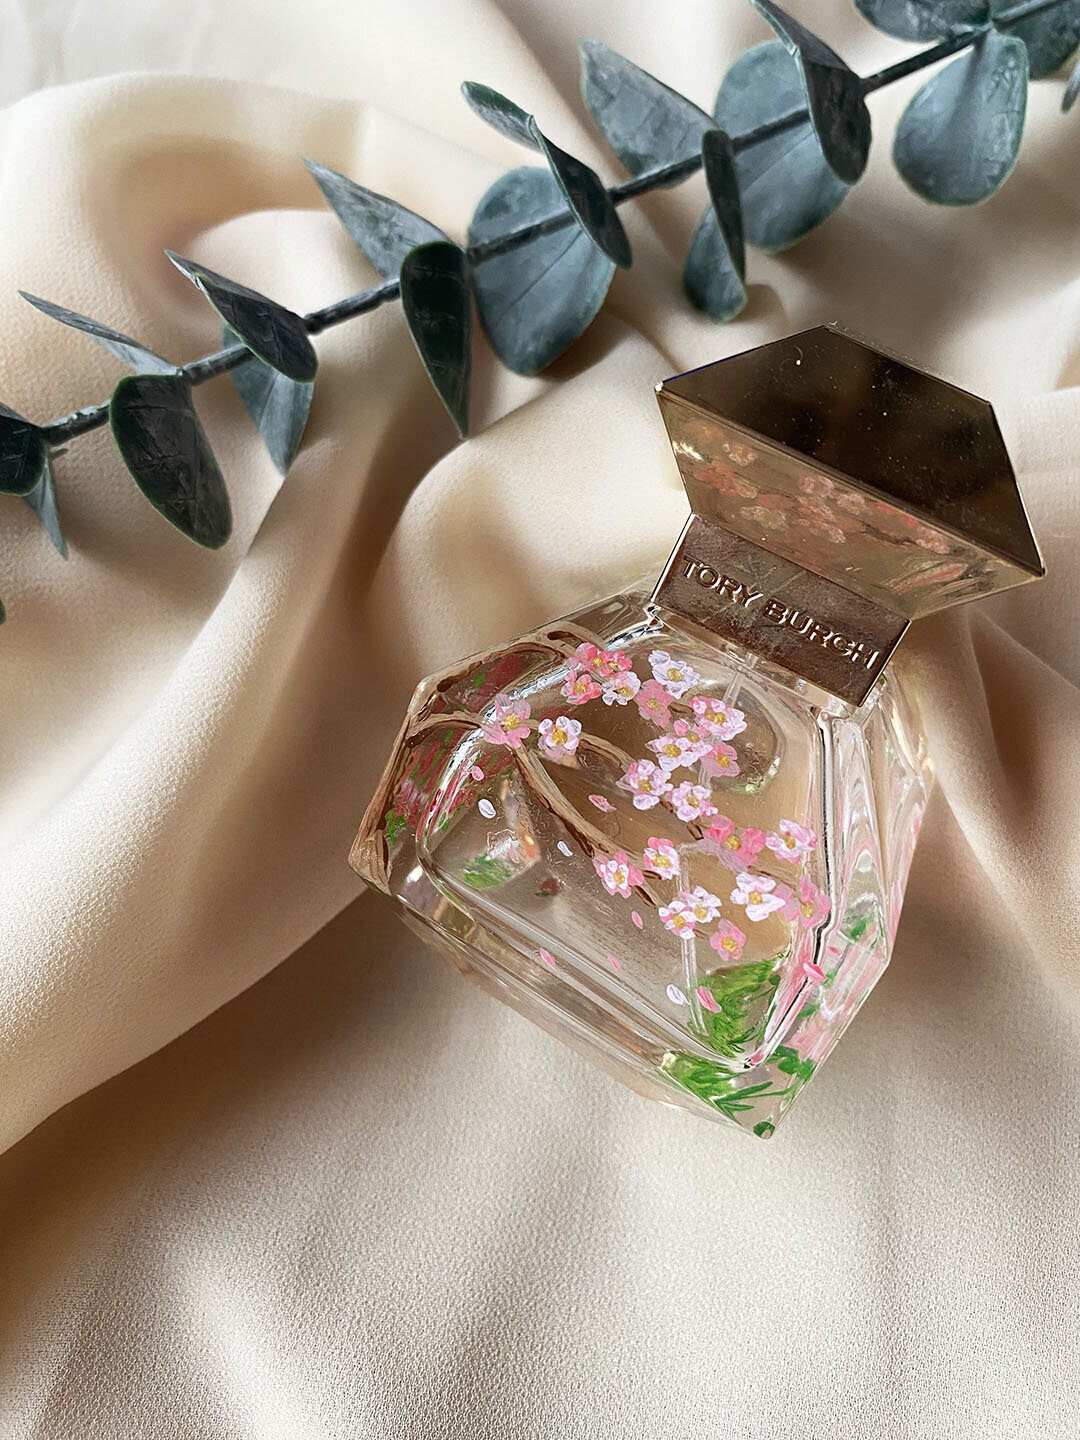 Tory Burch Perfume Bottle Painted with Cherry Blossom by Los Angeles Artist